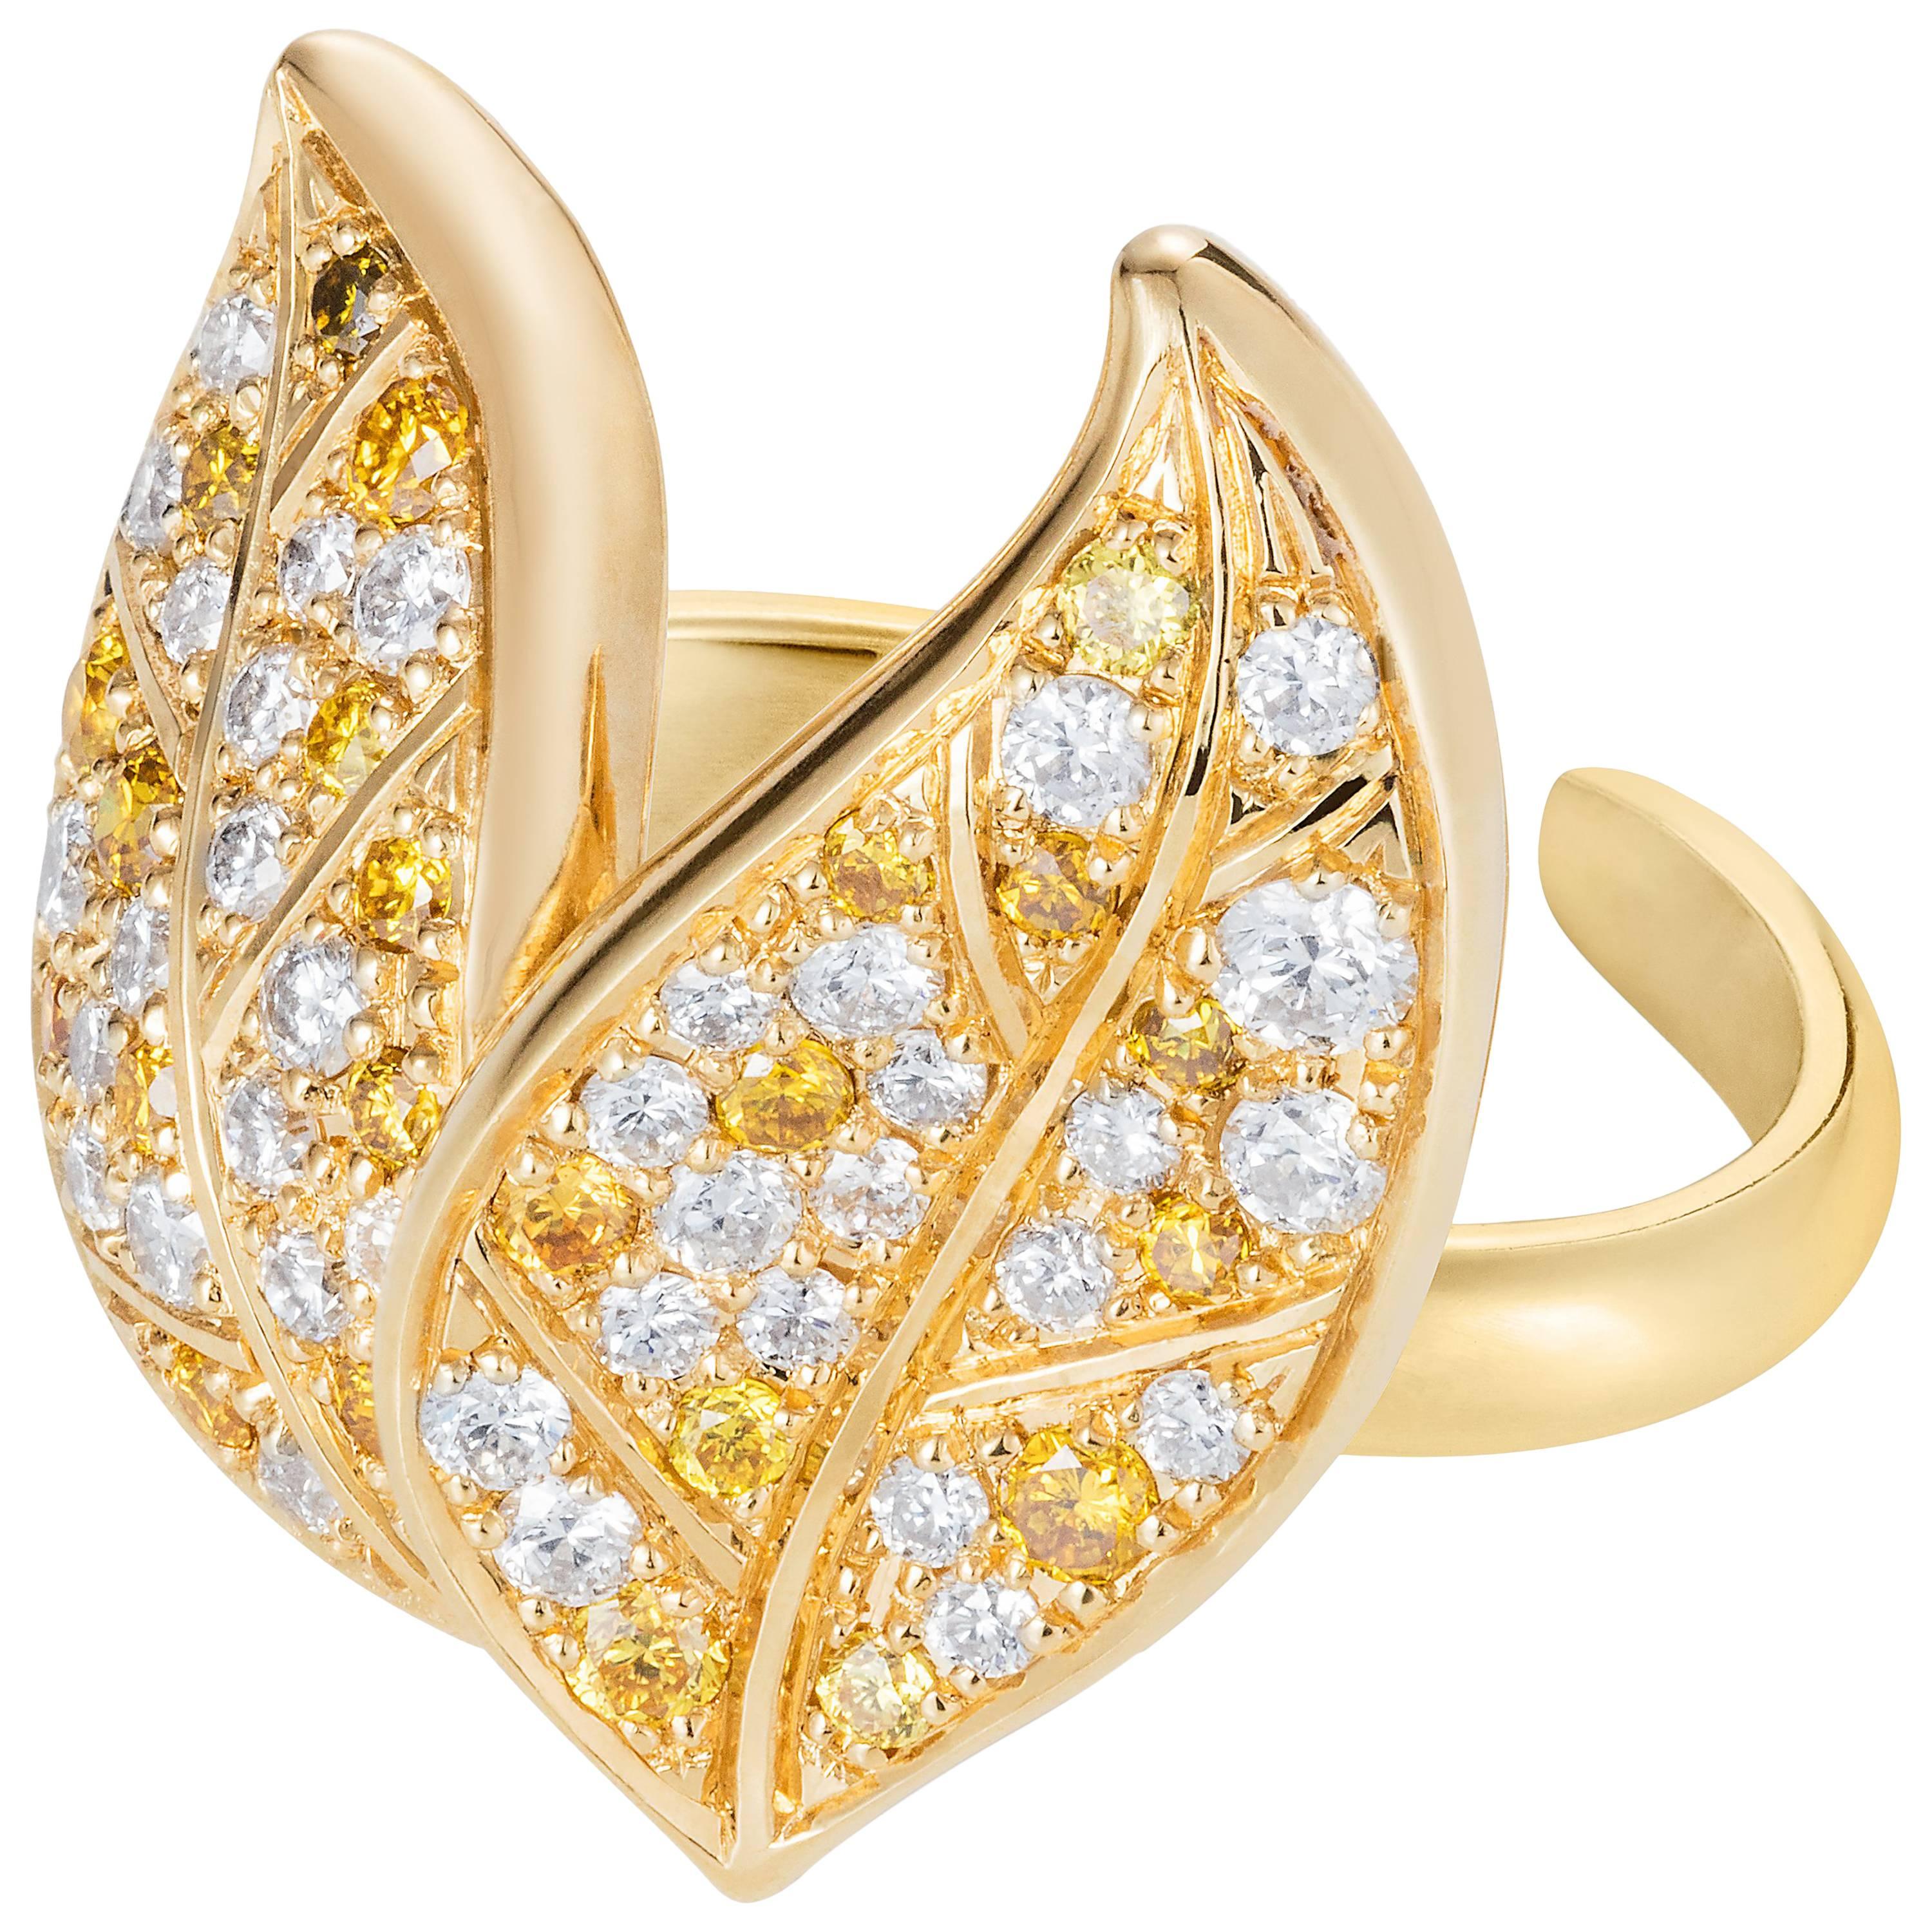 Nadine Aysoy Petite Feuilles 18 Karat Gold, Yellow and White Diamond Ear Cuff For Sale